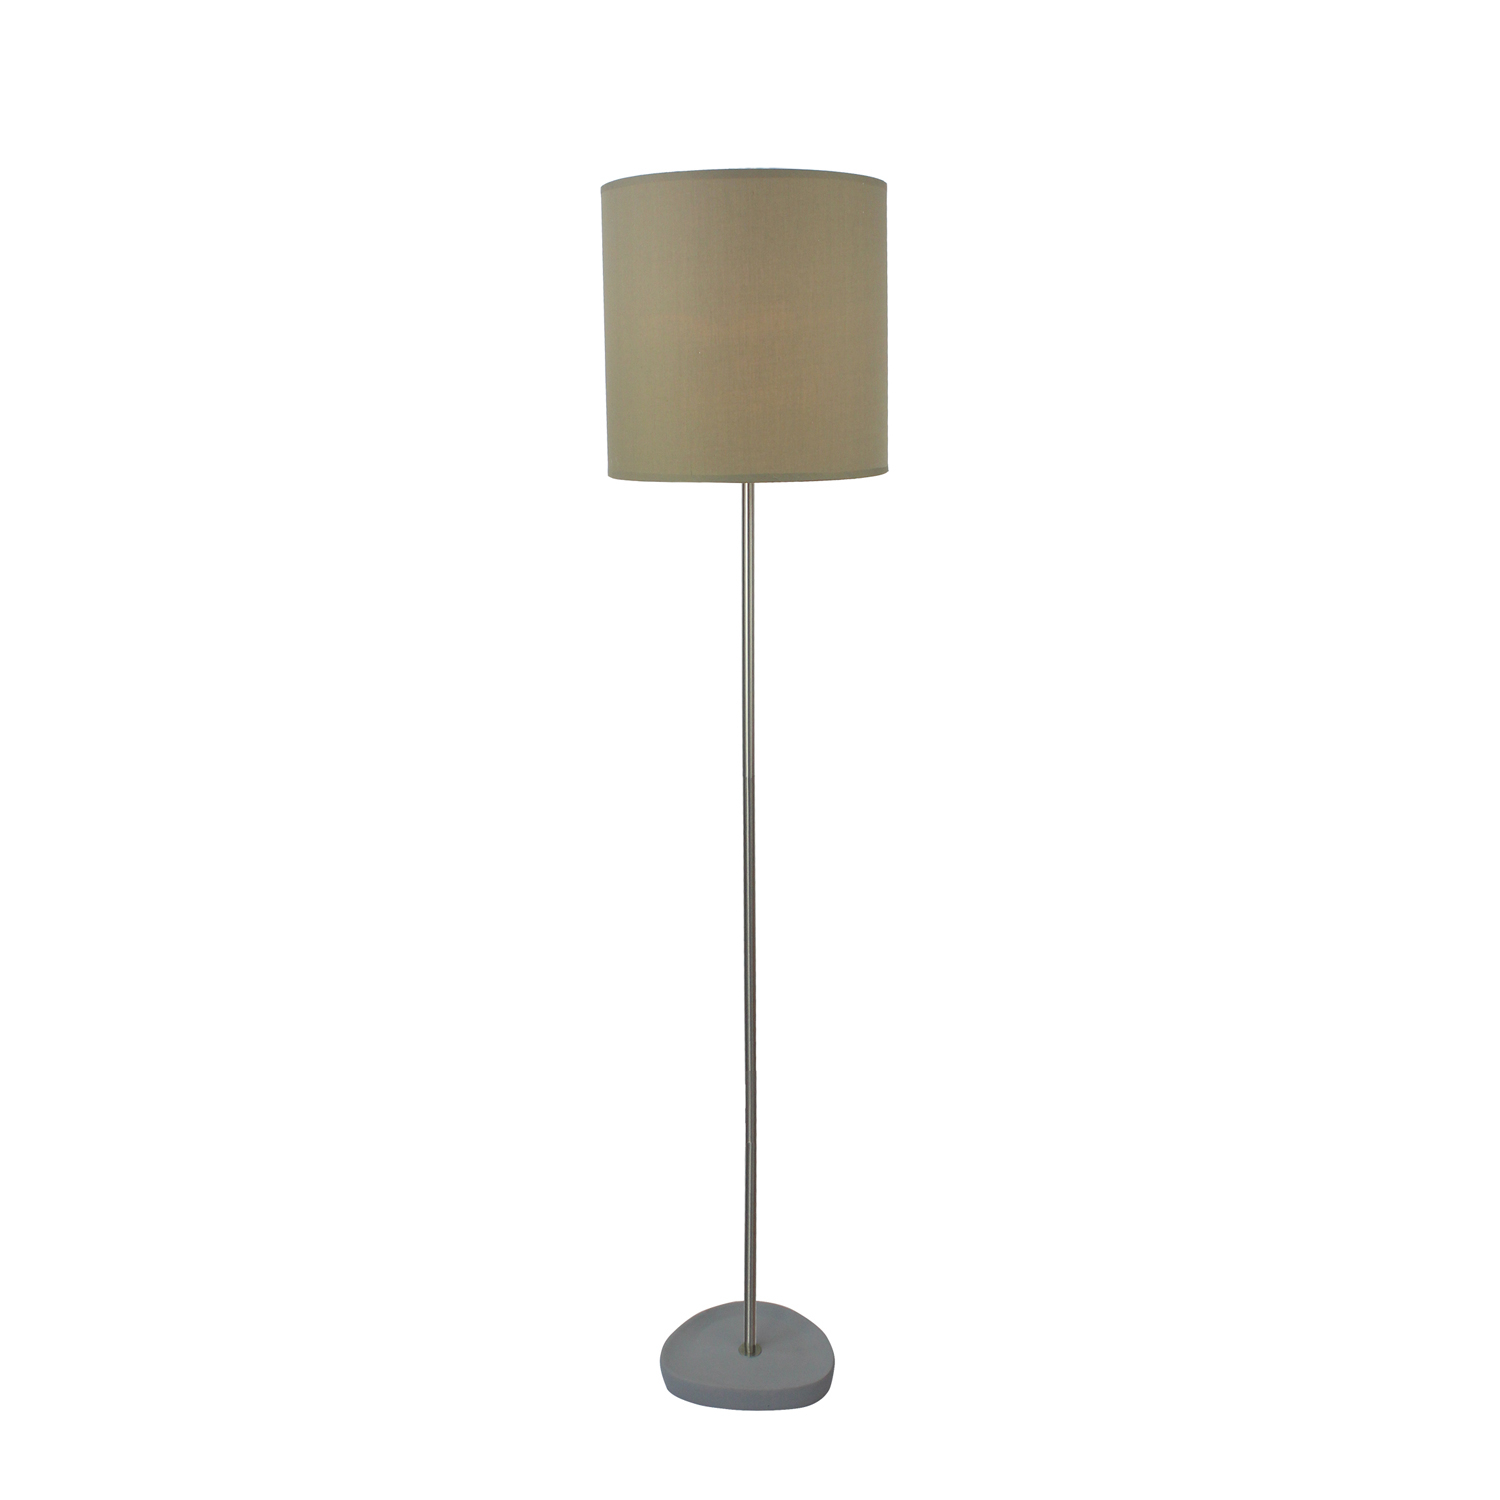 Details About Floor Lamp Luminite Concrete Stand Light Lampshade Taupe Bedroom Home Decor in sizing 1500 X 1500